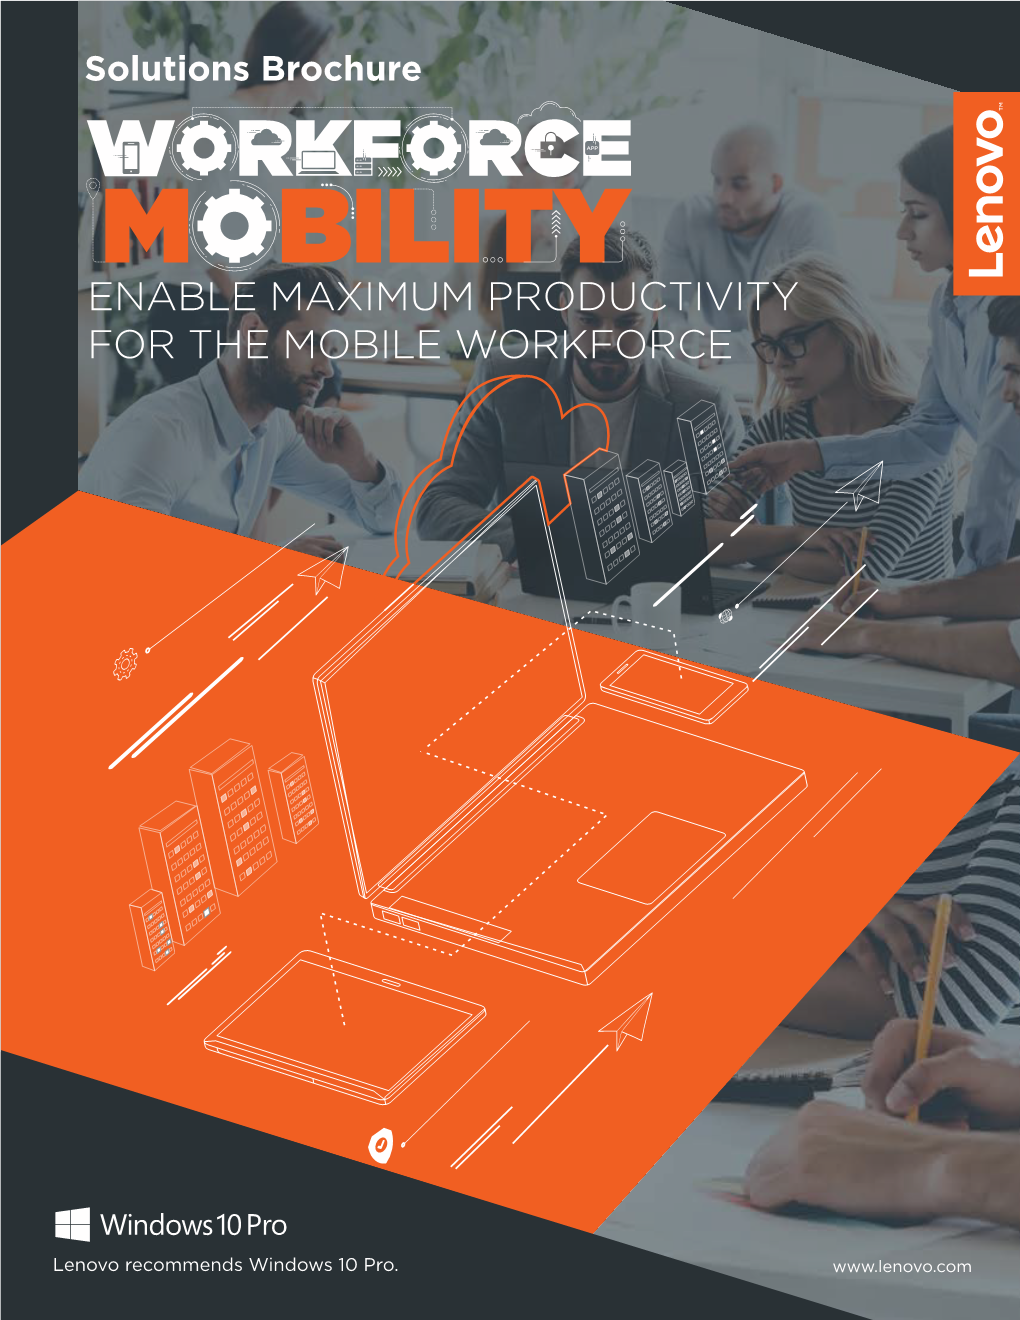 Enable Maximum Productivity for the Mobile Workforce